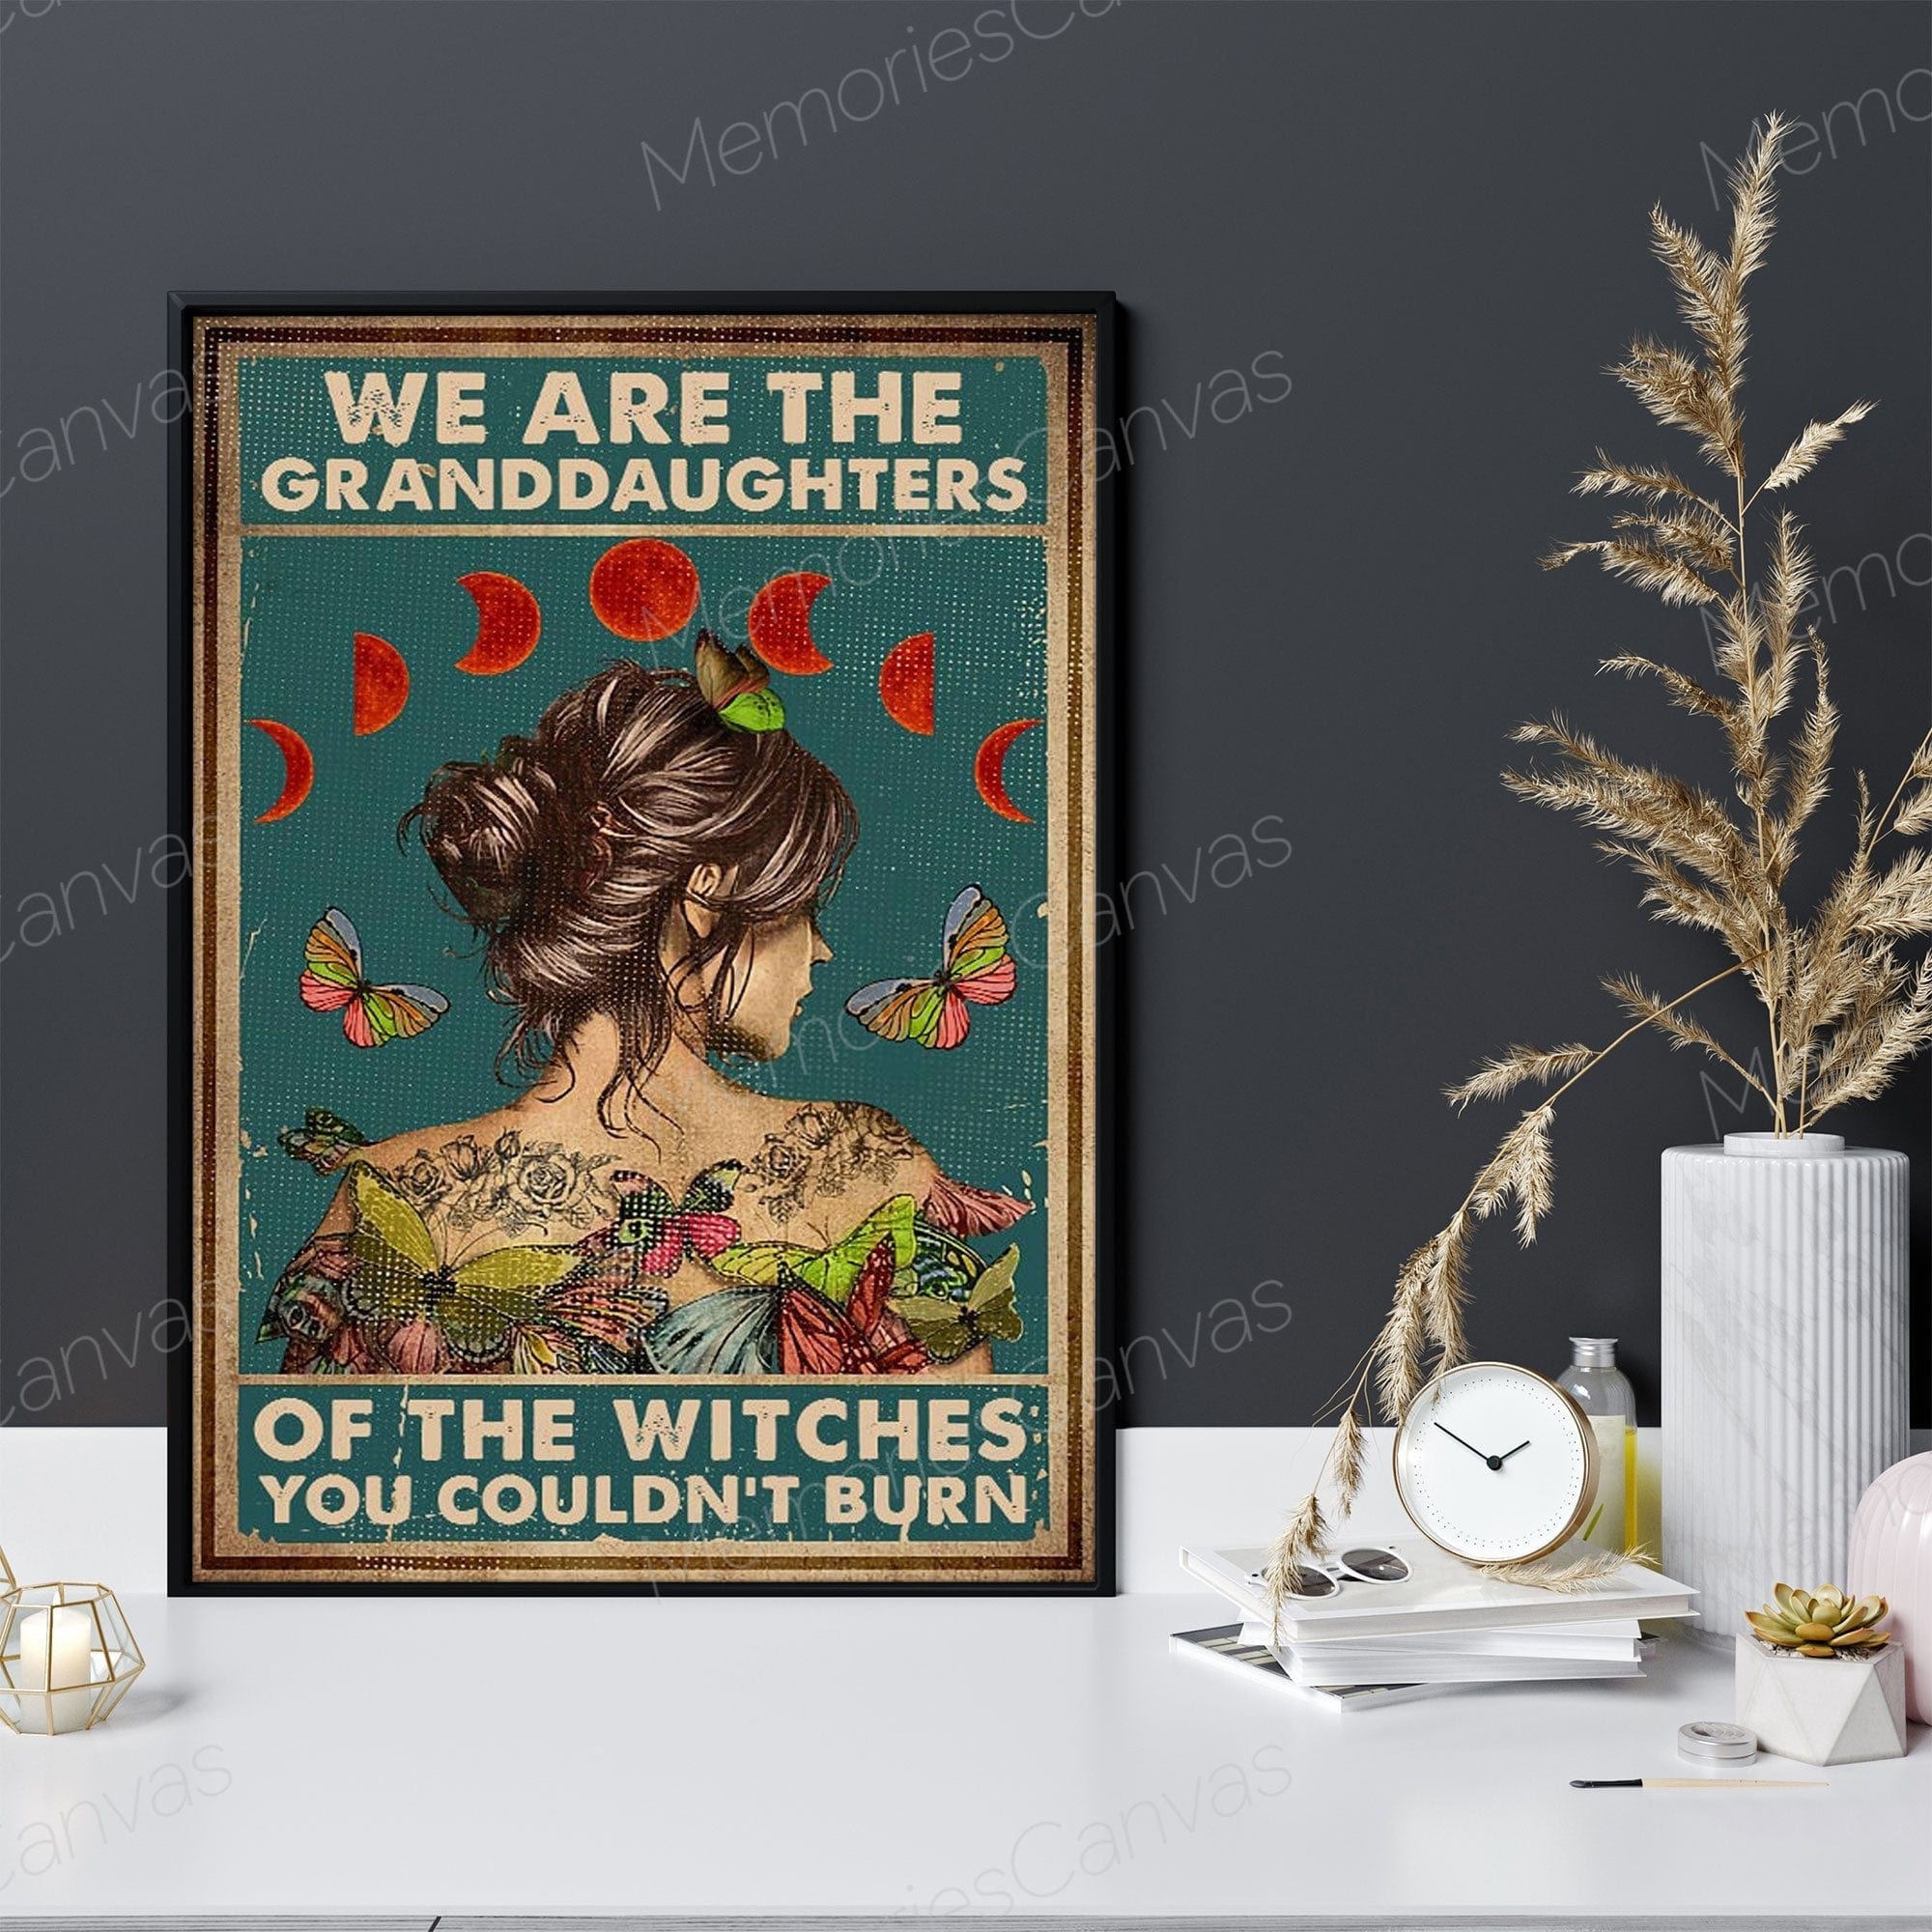 We Are The Granddaughters Of The Witches You Couldn't Burn Hippie Poster, Canvas